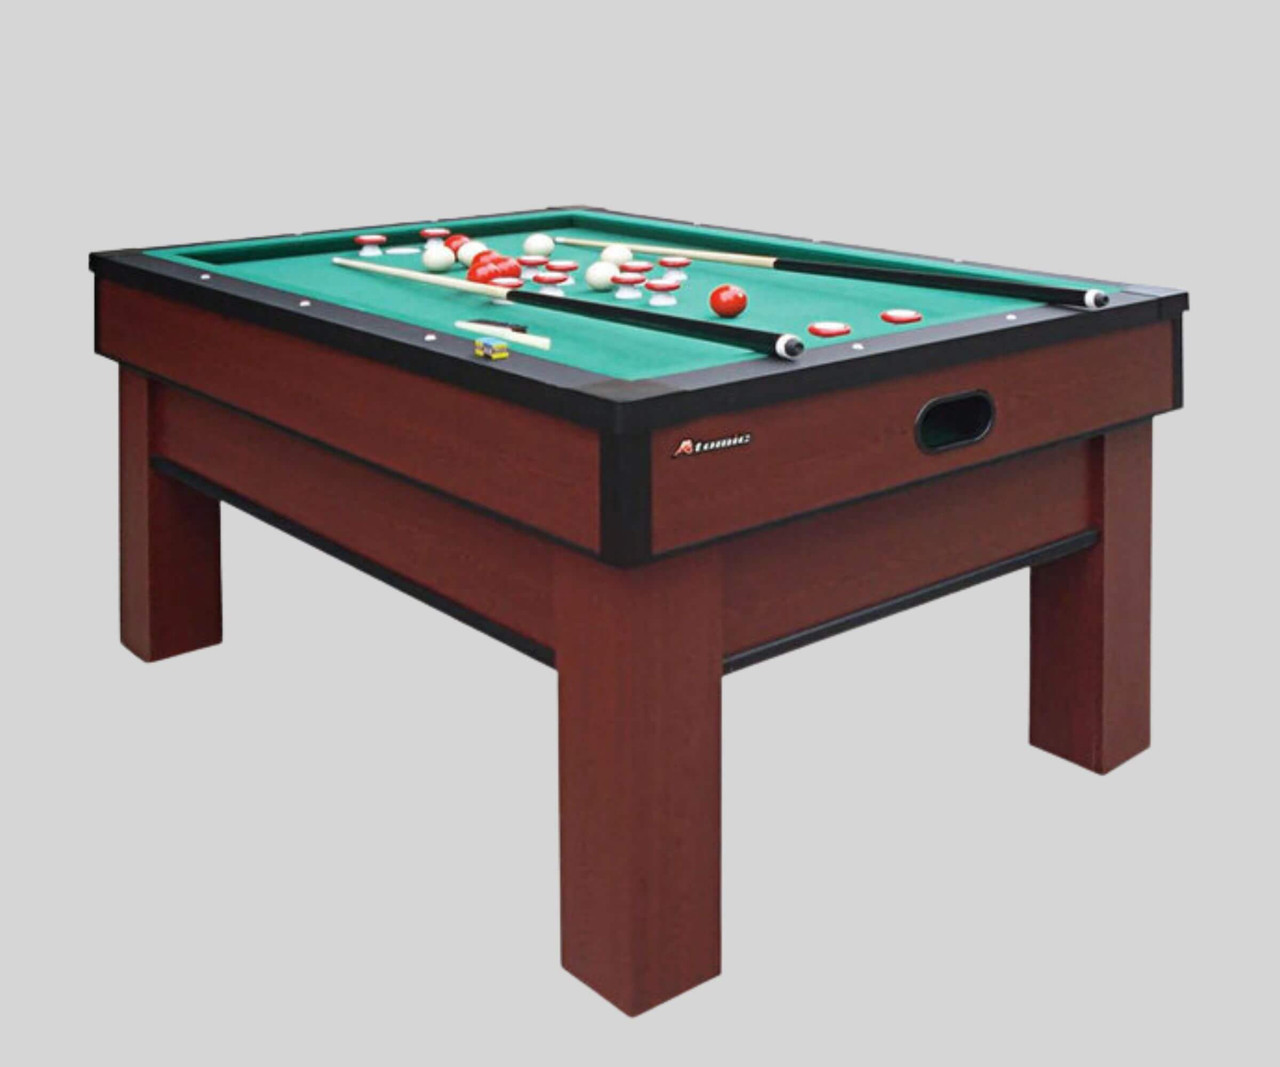 Atomic 57 1/2" Professional Bumper Pool Table with Accessories-Chicken Pieces